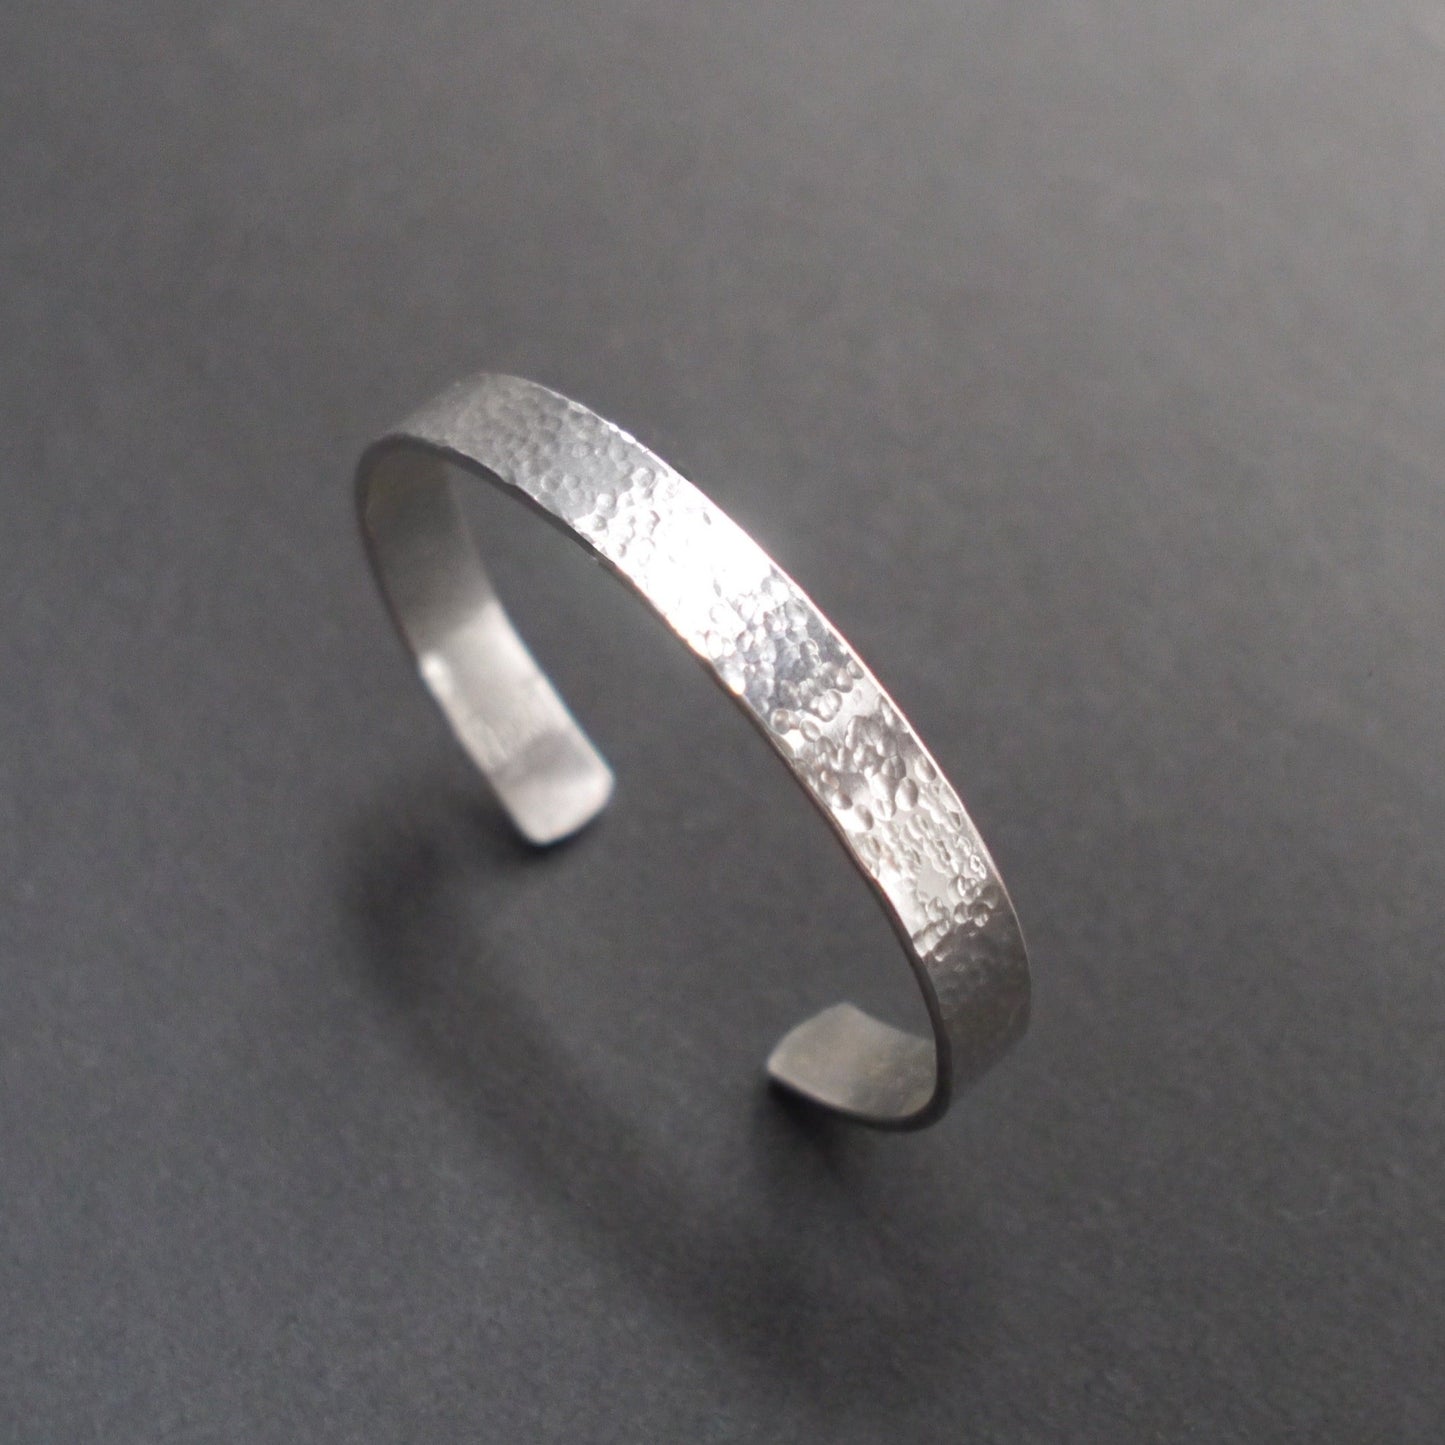 Hammered Texture Cuff in 8mm Sterling Silver